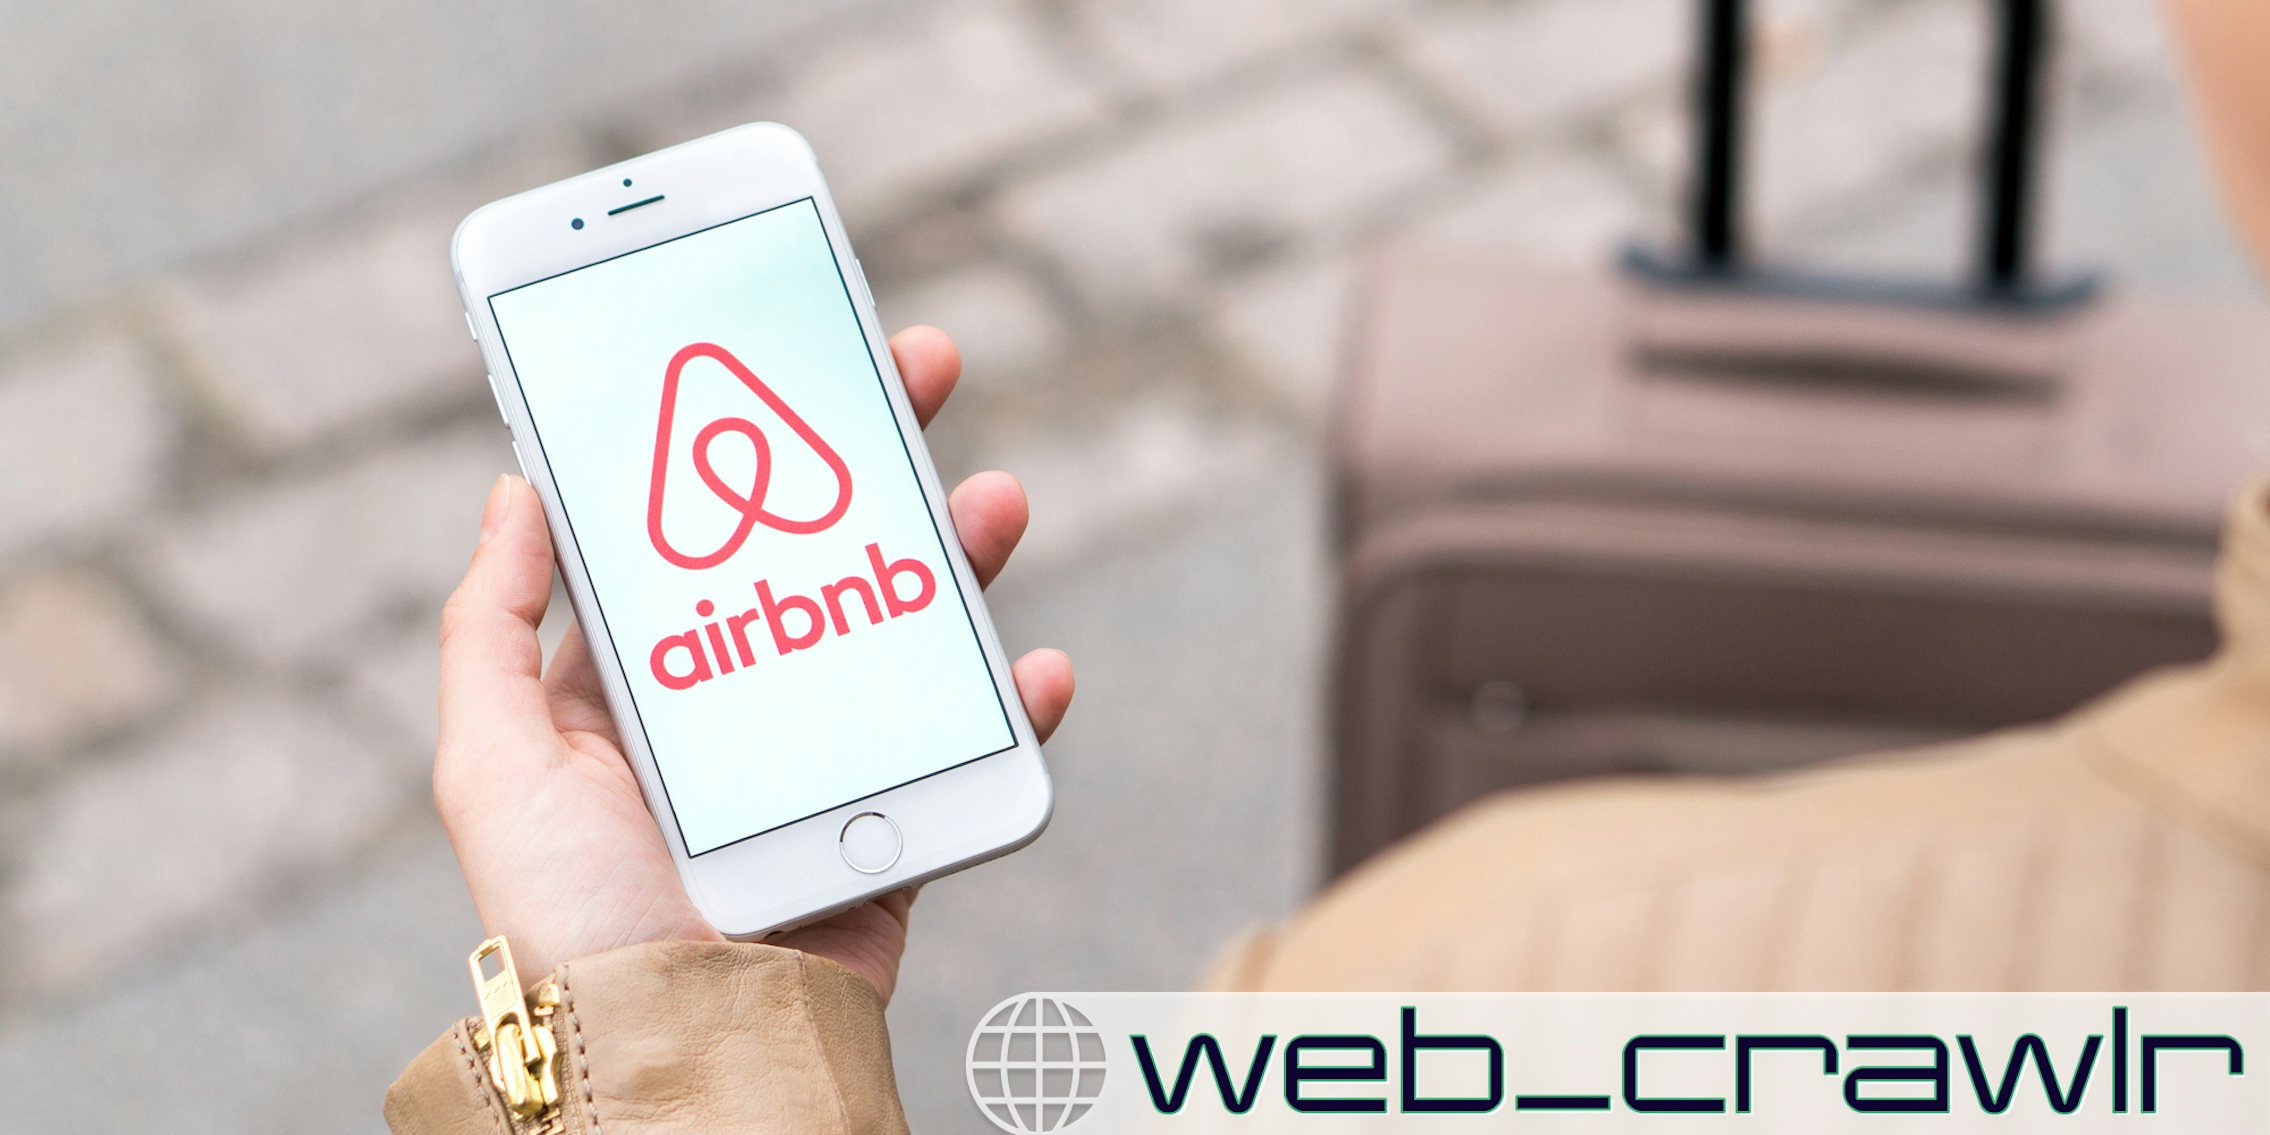 A person holding a phone with the Airbnb logo on it. The Daily Dot newsletter web_crawlr logo is in the bottom right corner.